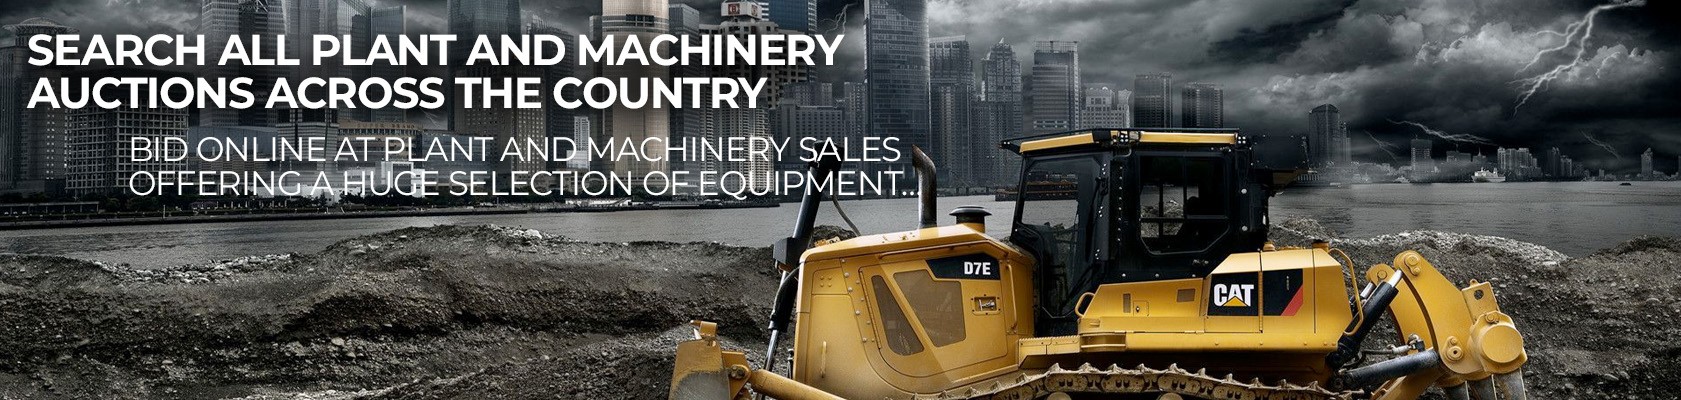 Plant and Machinery Auctions